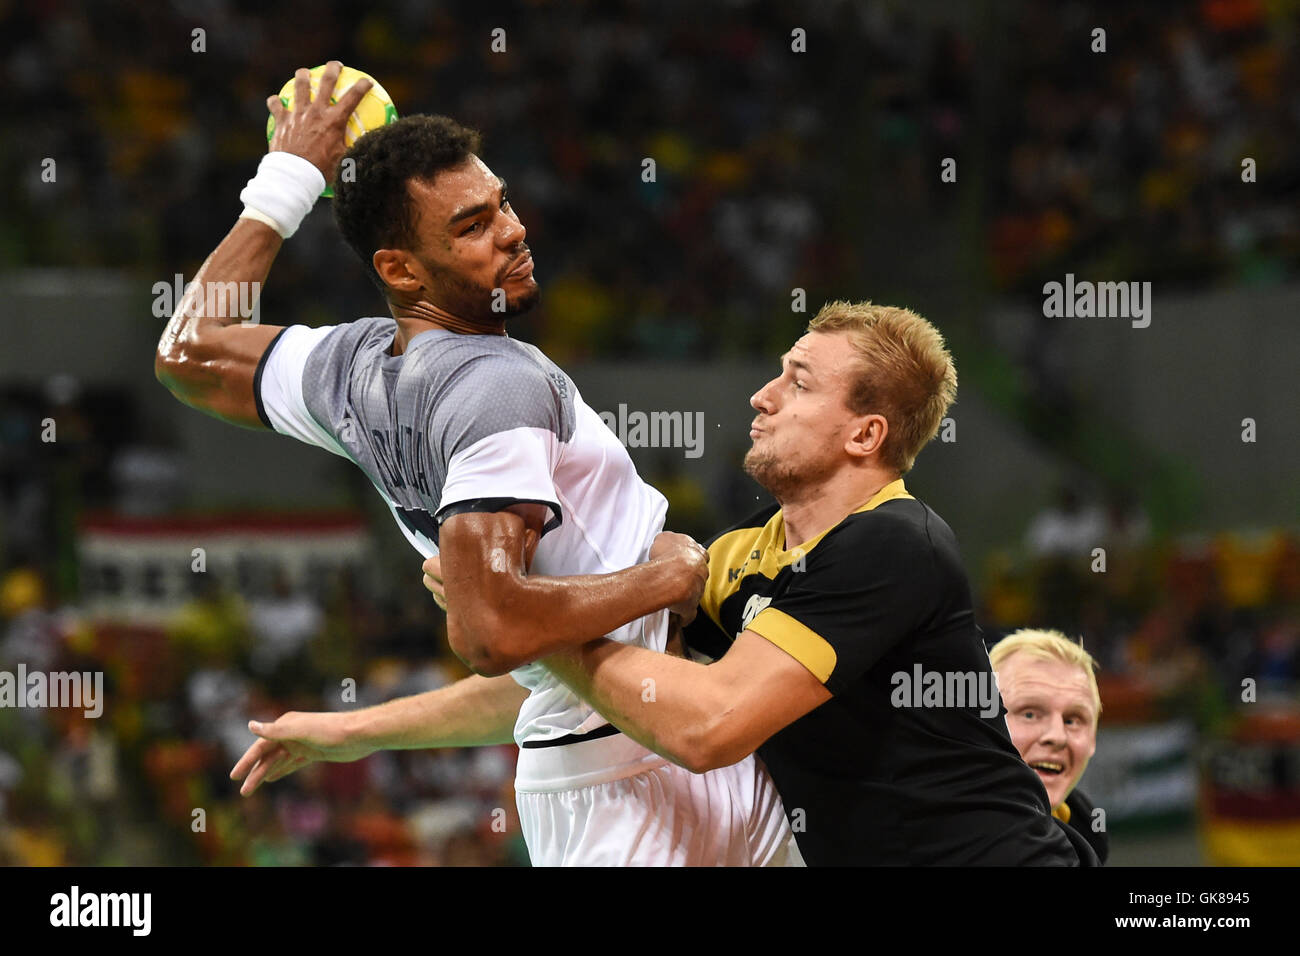 Rio de Janeiro, Brazil. 19th August, 2016. Adrien Dipanda (FRA) and Julius KUHN (GER) in the match France vs Germany Handball during the Rio 2016 Olympics held in the arena of the future. NOT AVAILABLE FOR LICENSING IN CHINA (Photo: Celso Pupo/Fotoarena) Credit:  Foto Arena LTDA/Alamy Live News Stock Photo